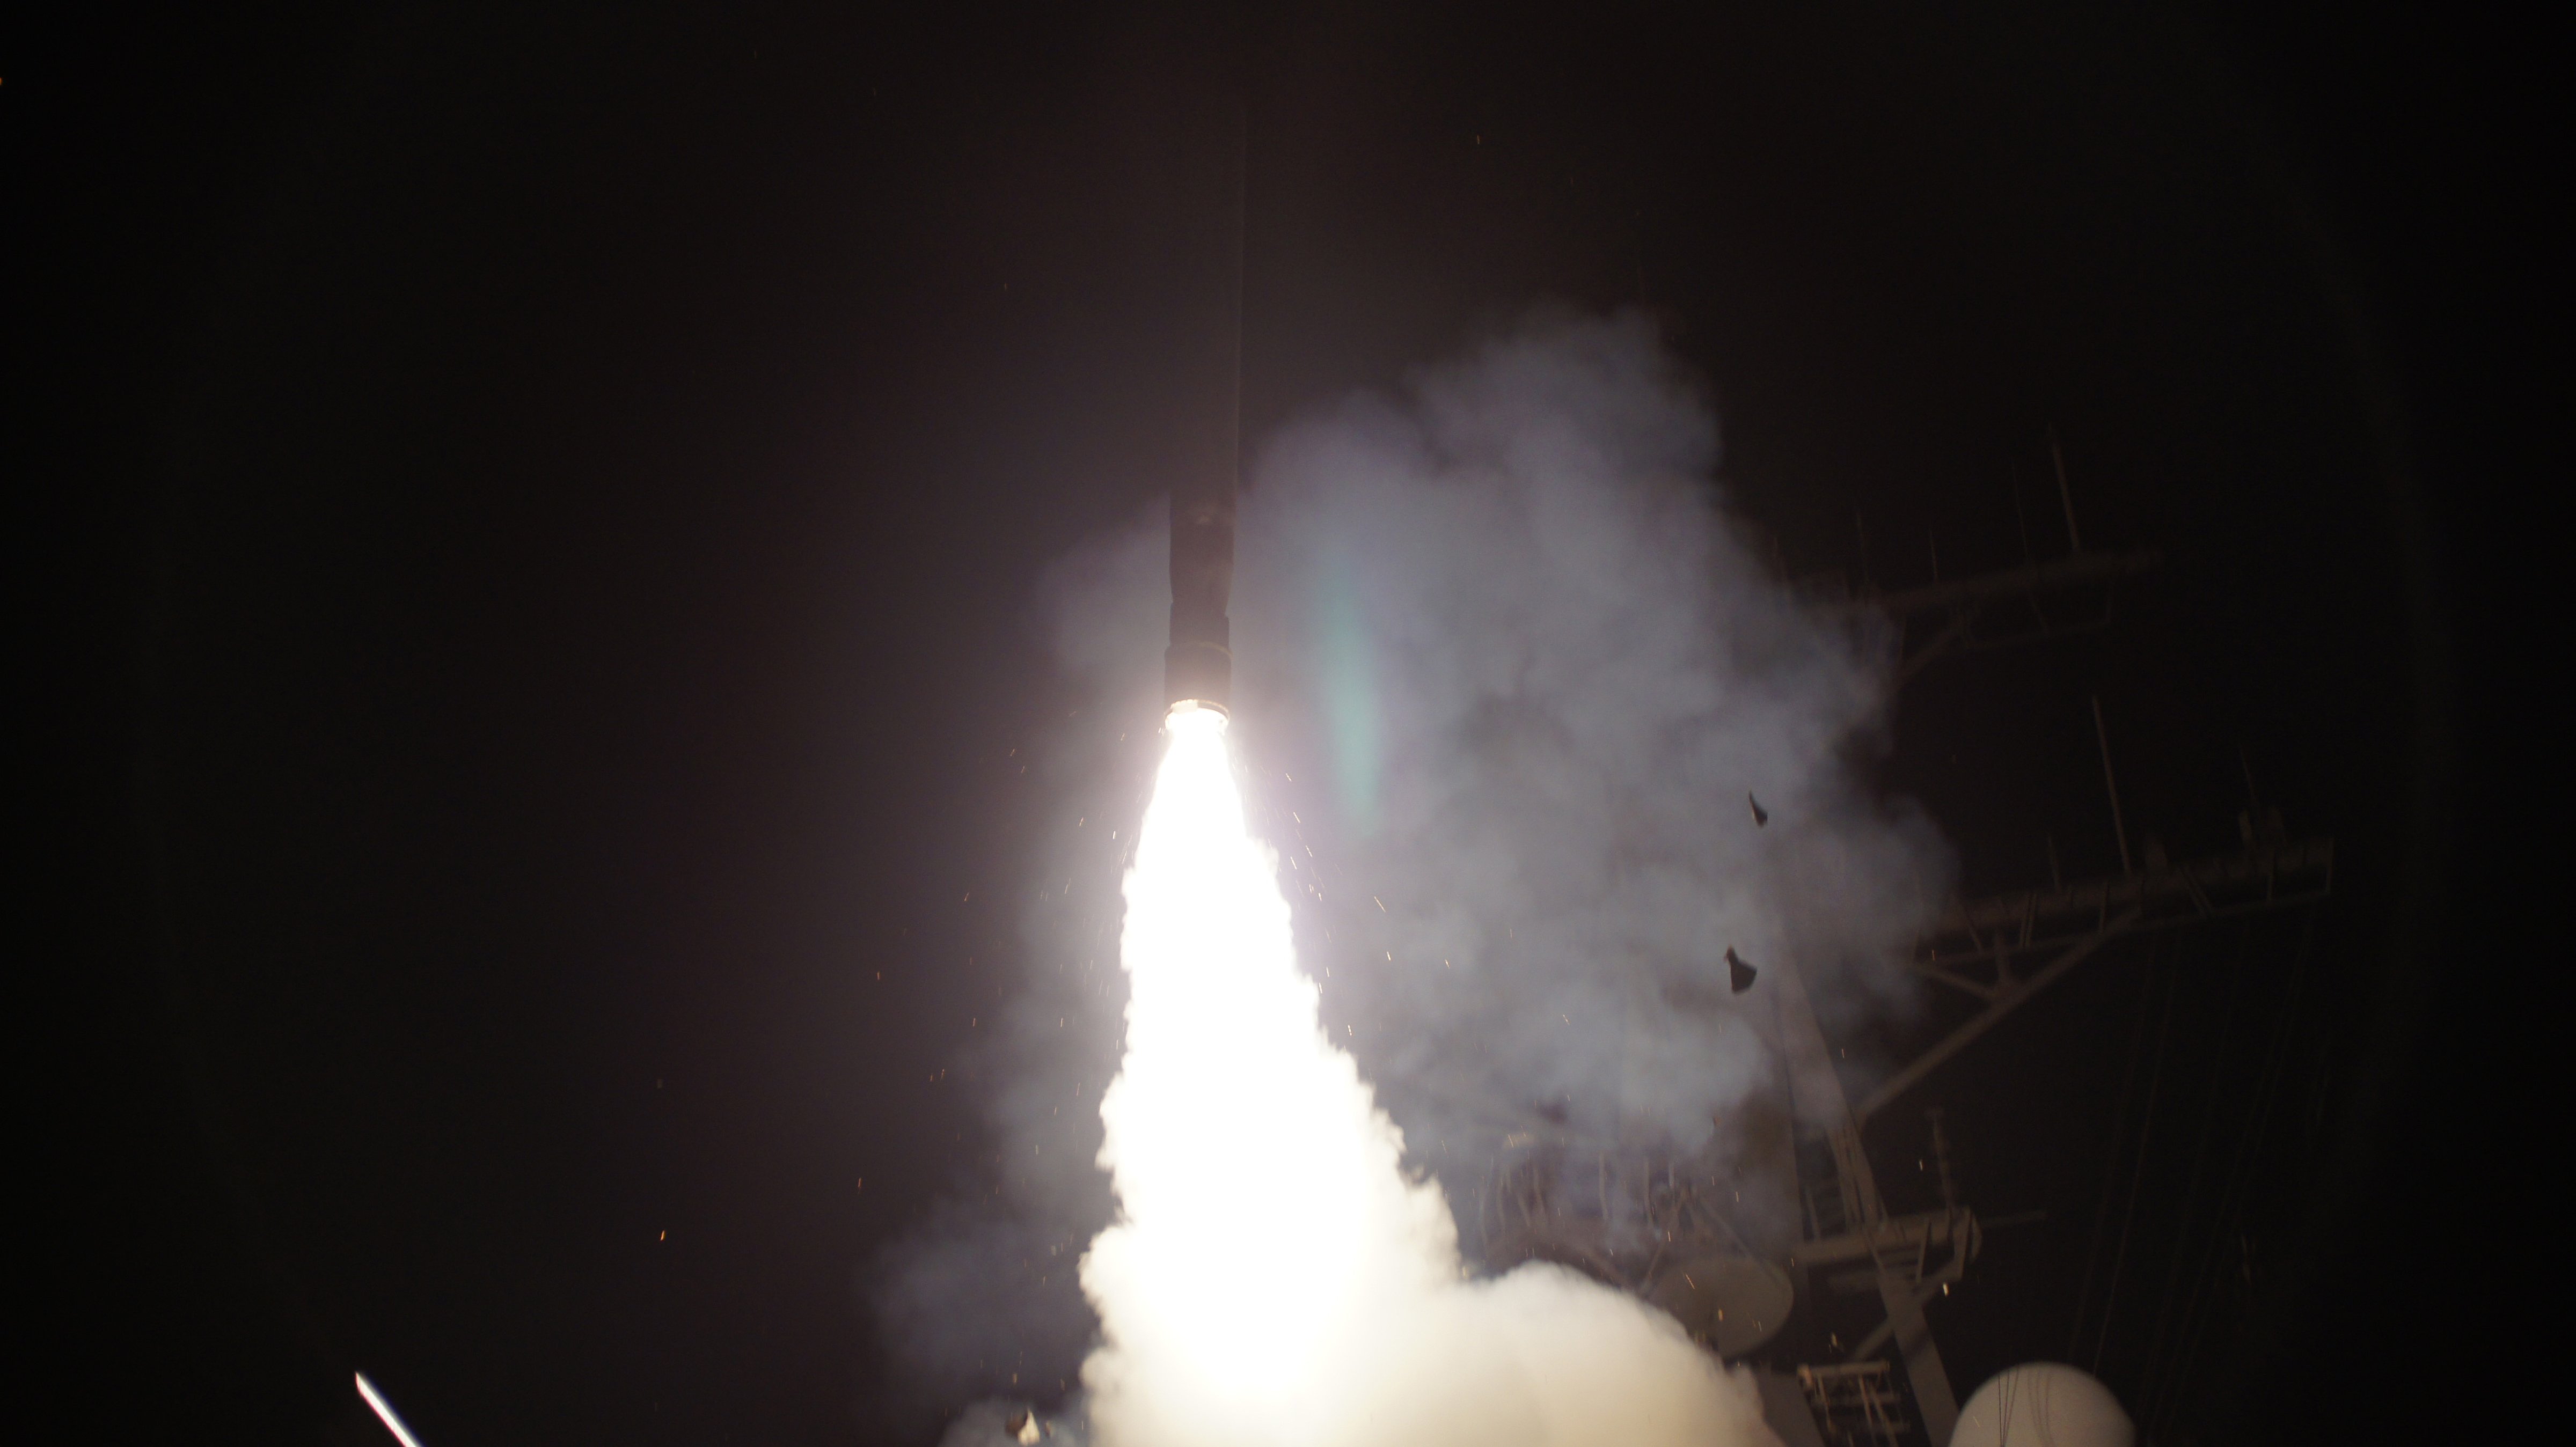 The U.S. attacked targets inside Syria early Tuesday with Tomahawk missiles like this one, shown being launched against Libya from a U.S. Navy warship in the Mediterranean Sea in 2011. (U.S. Navy / Getty Images)